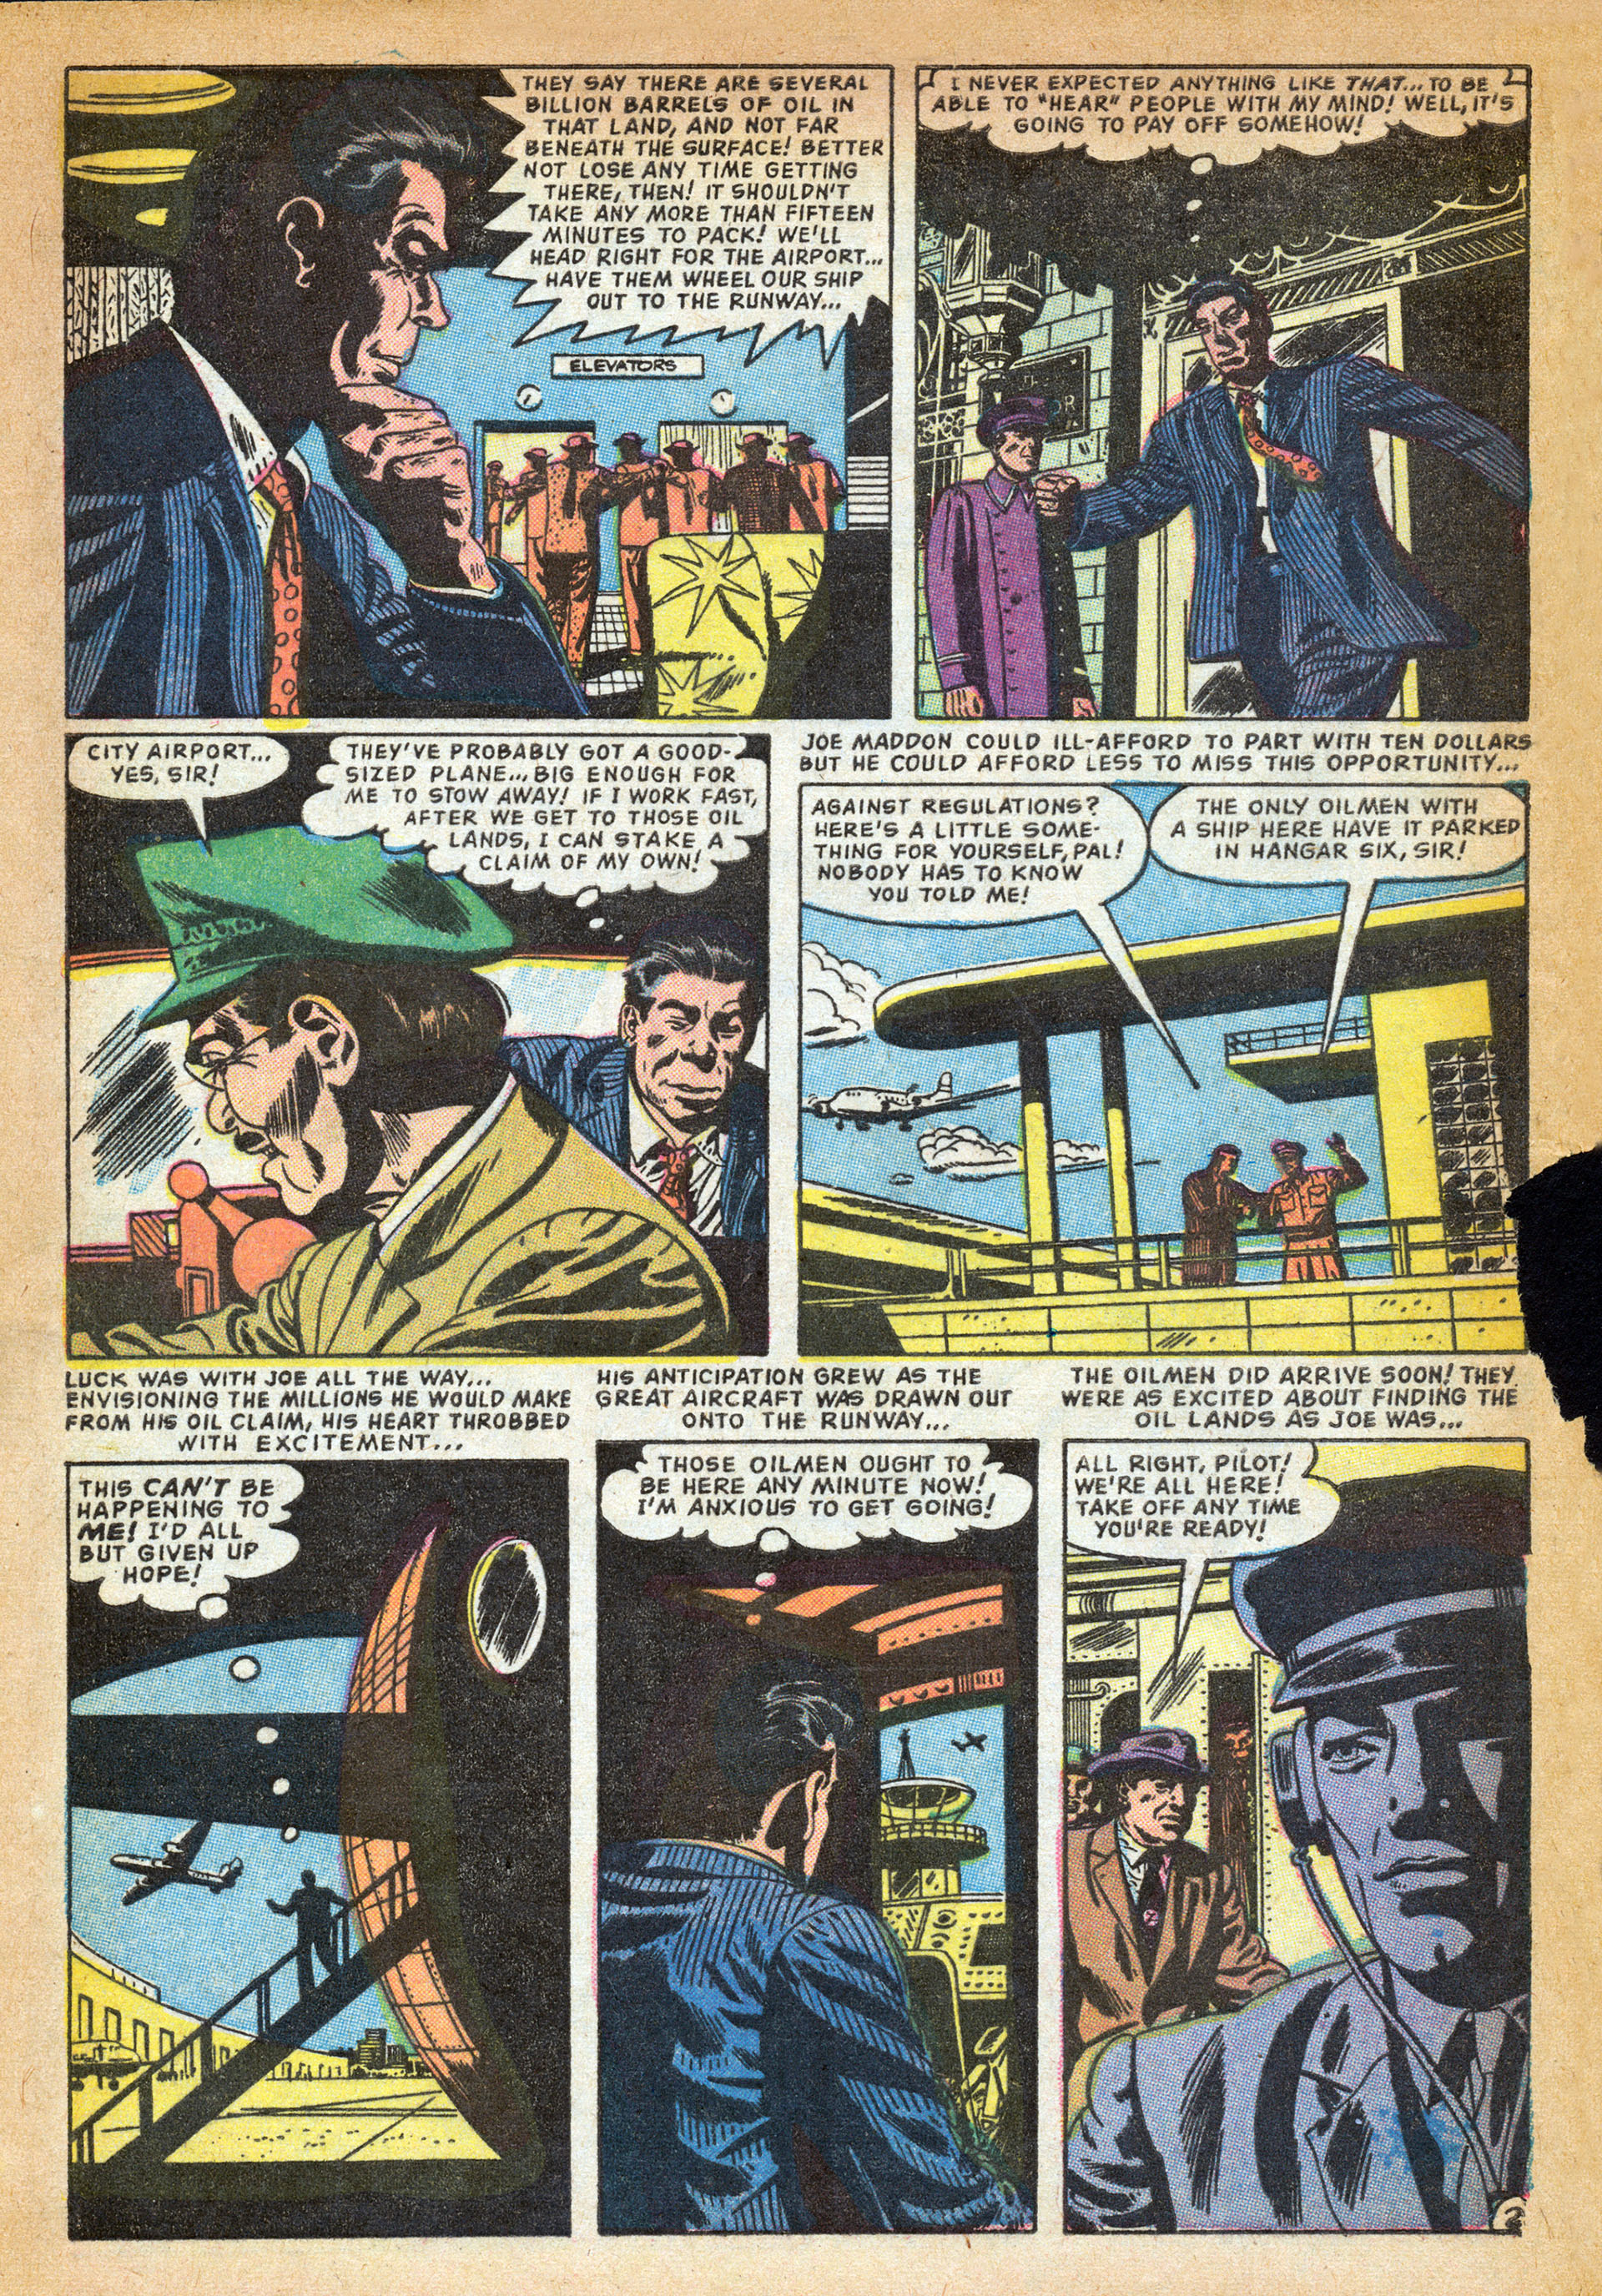 Marvel Tales (1949) 153 Page 3